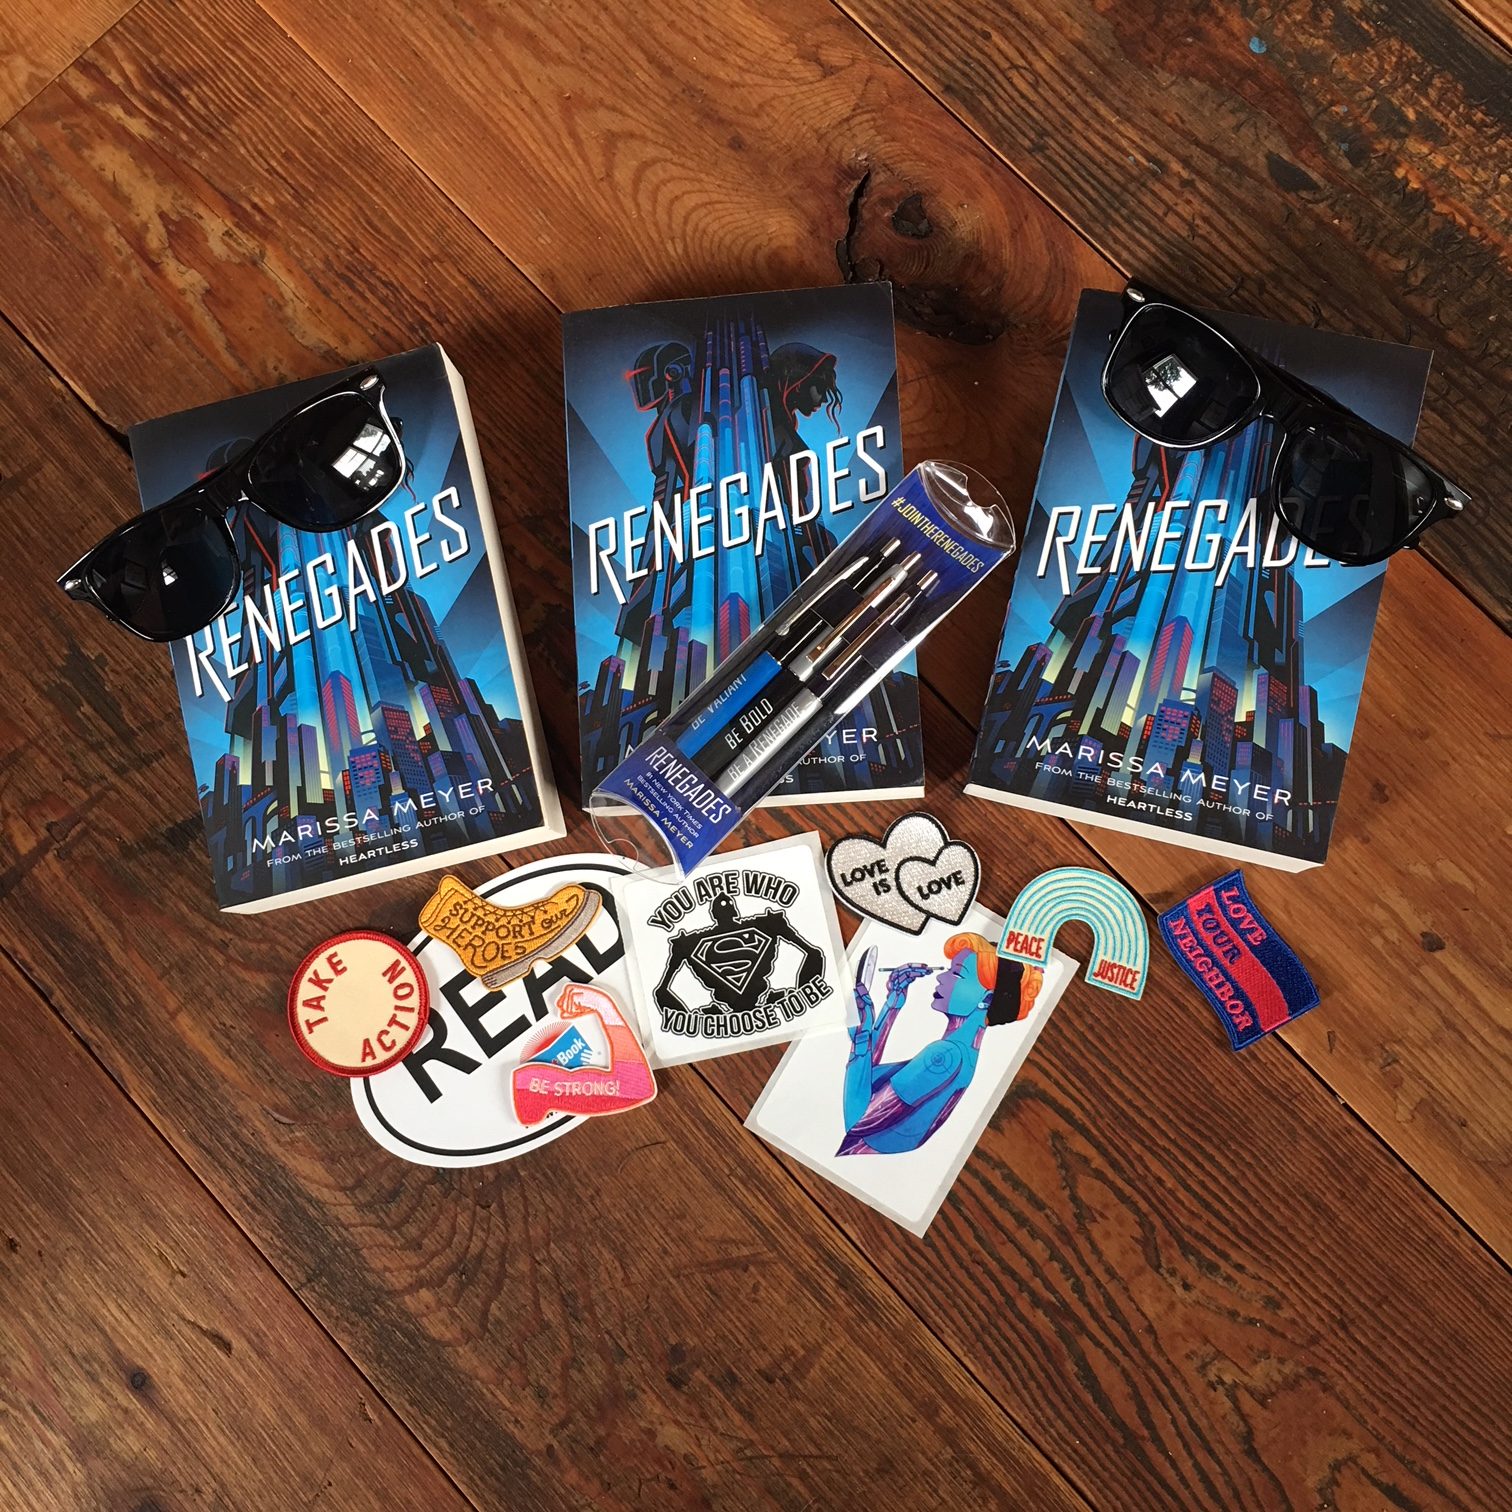 It's a Birthday Giveaway! Enter to Win GONE ROGUE, exclusive swag